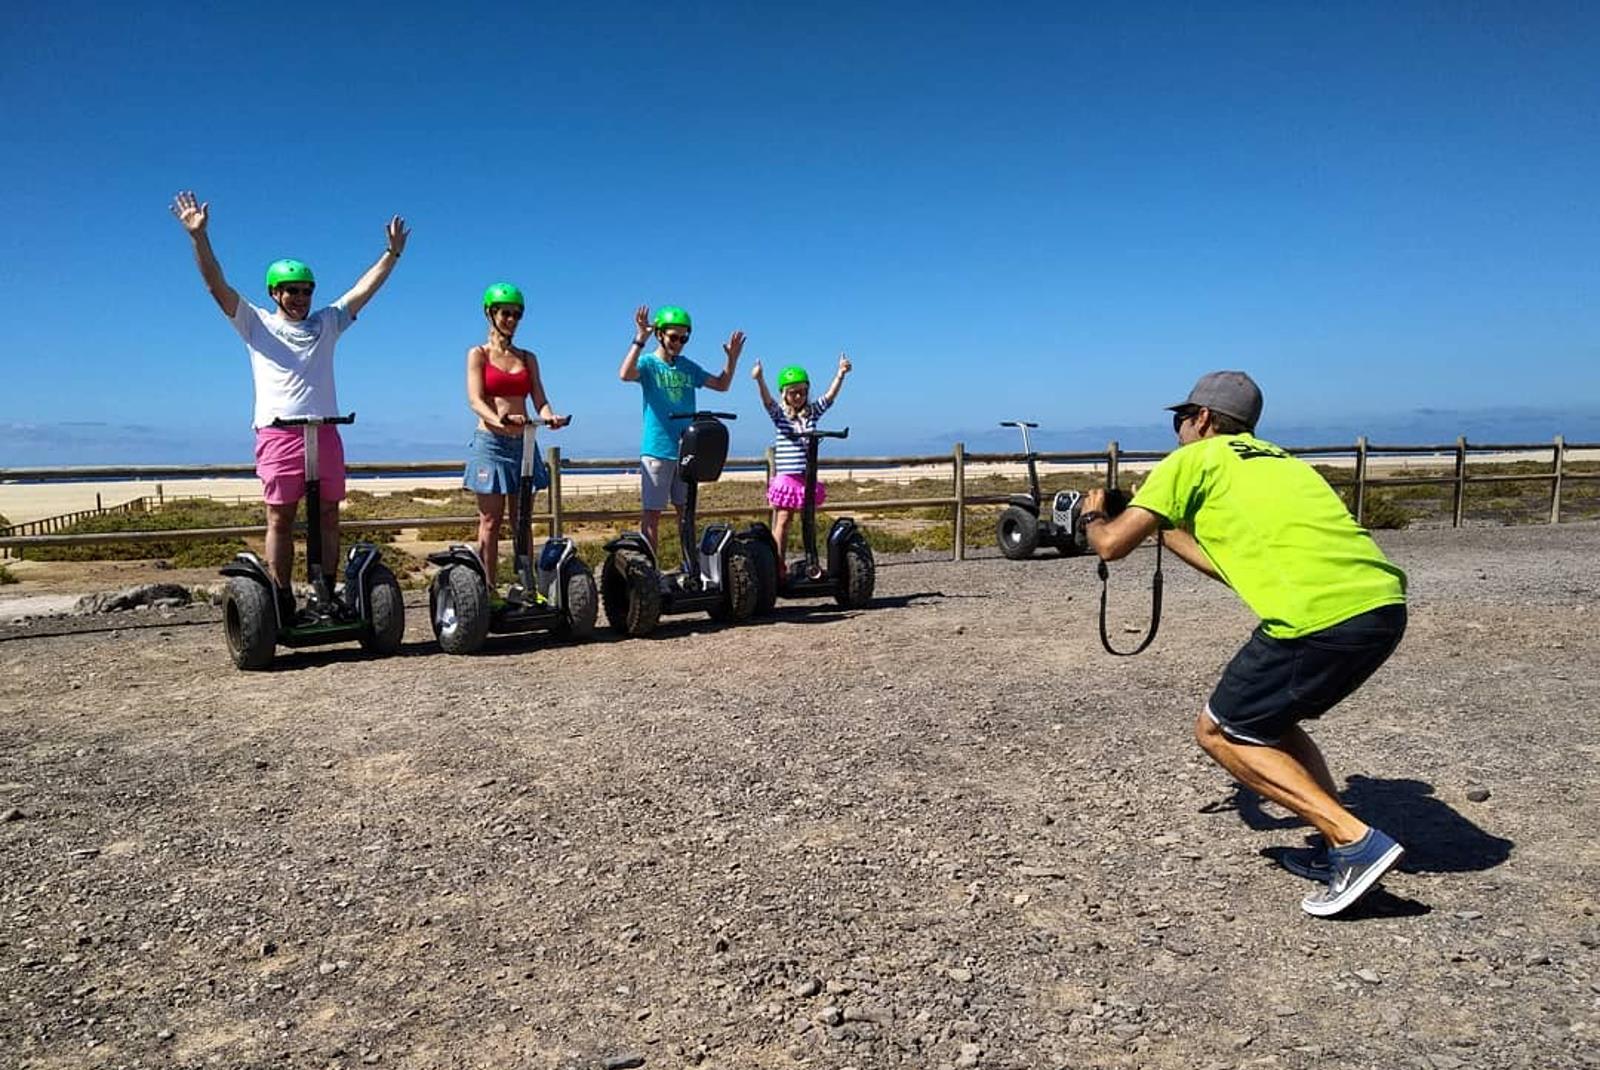 Segway-Tour-from-Playa-de-Jandia-to-Morro-Jable-2